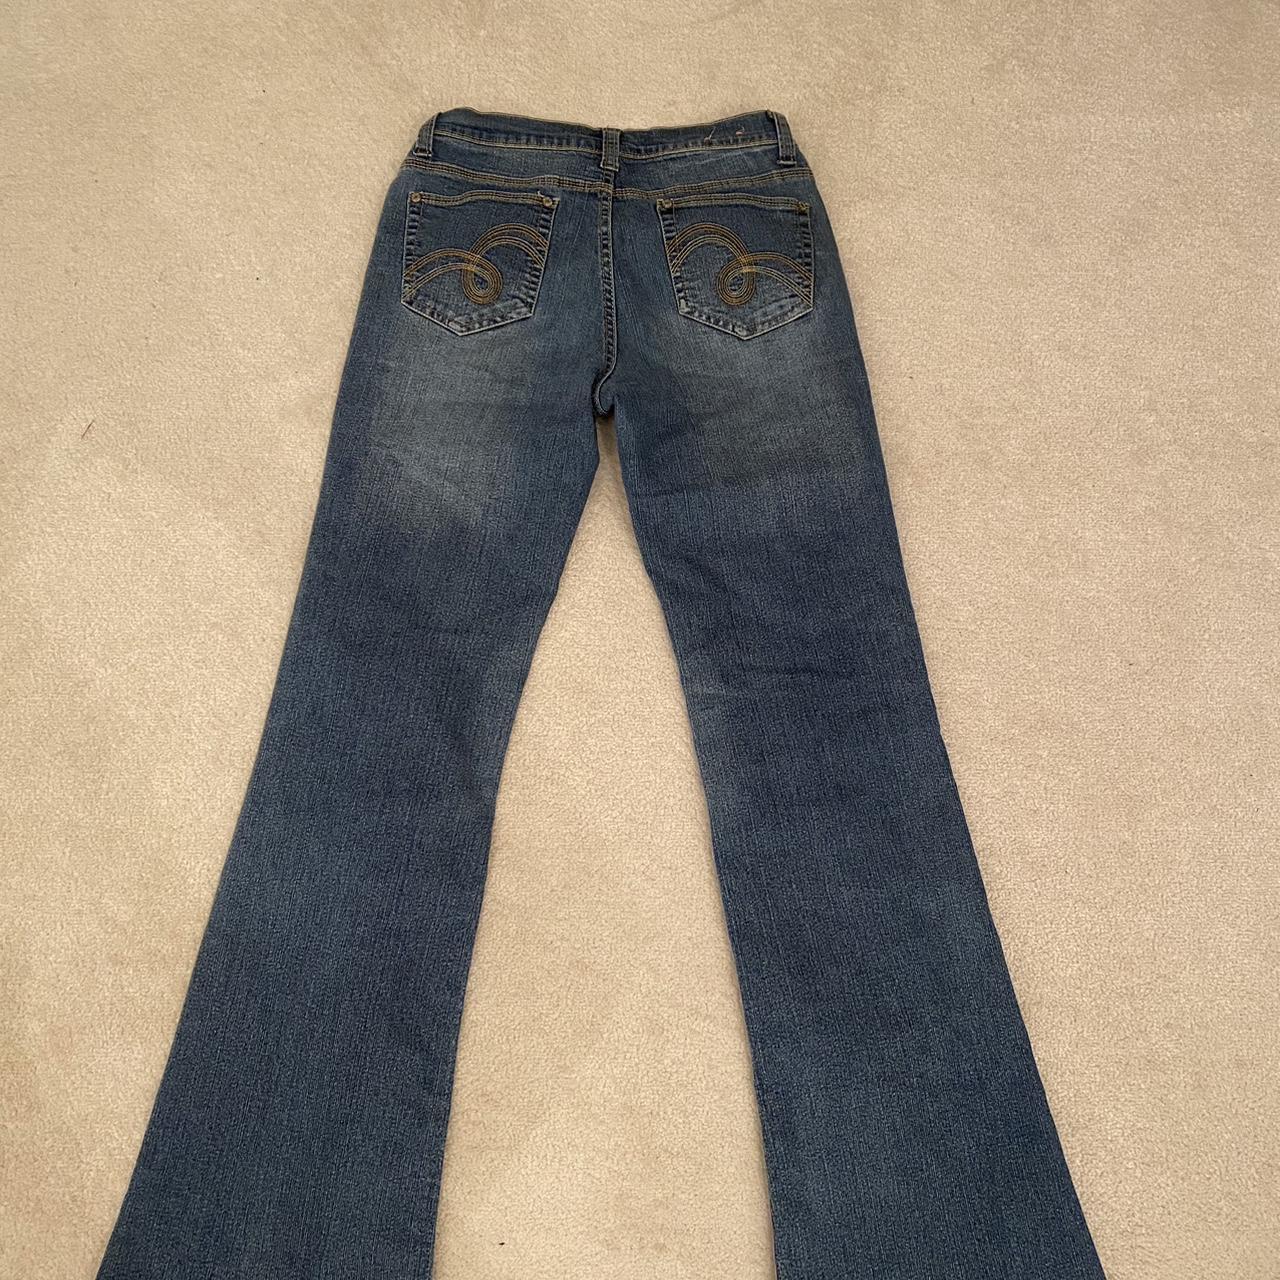 Hula Low Rise Bootcut Jeans -Perfect... - Depop